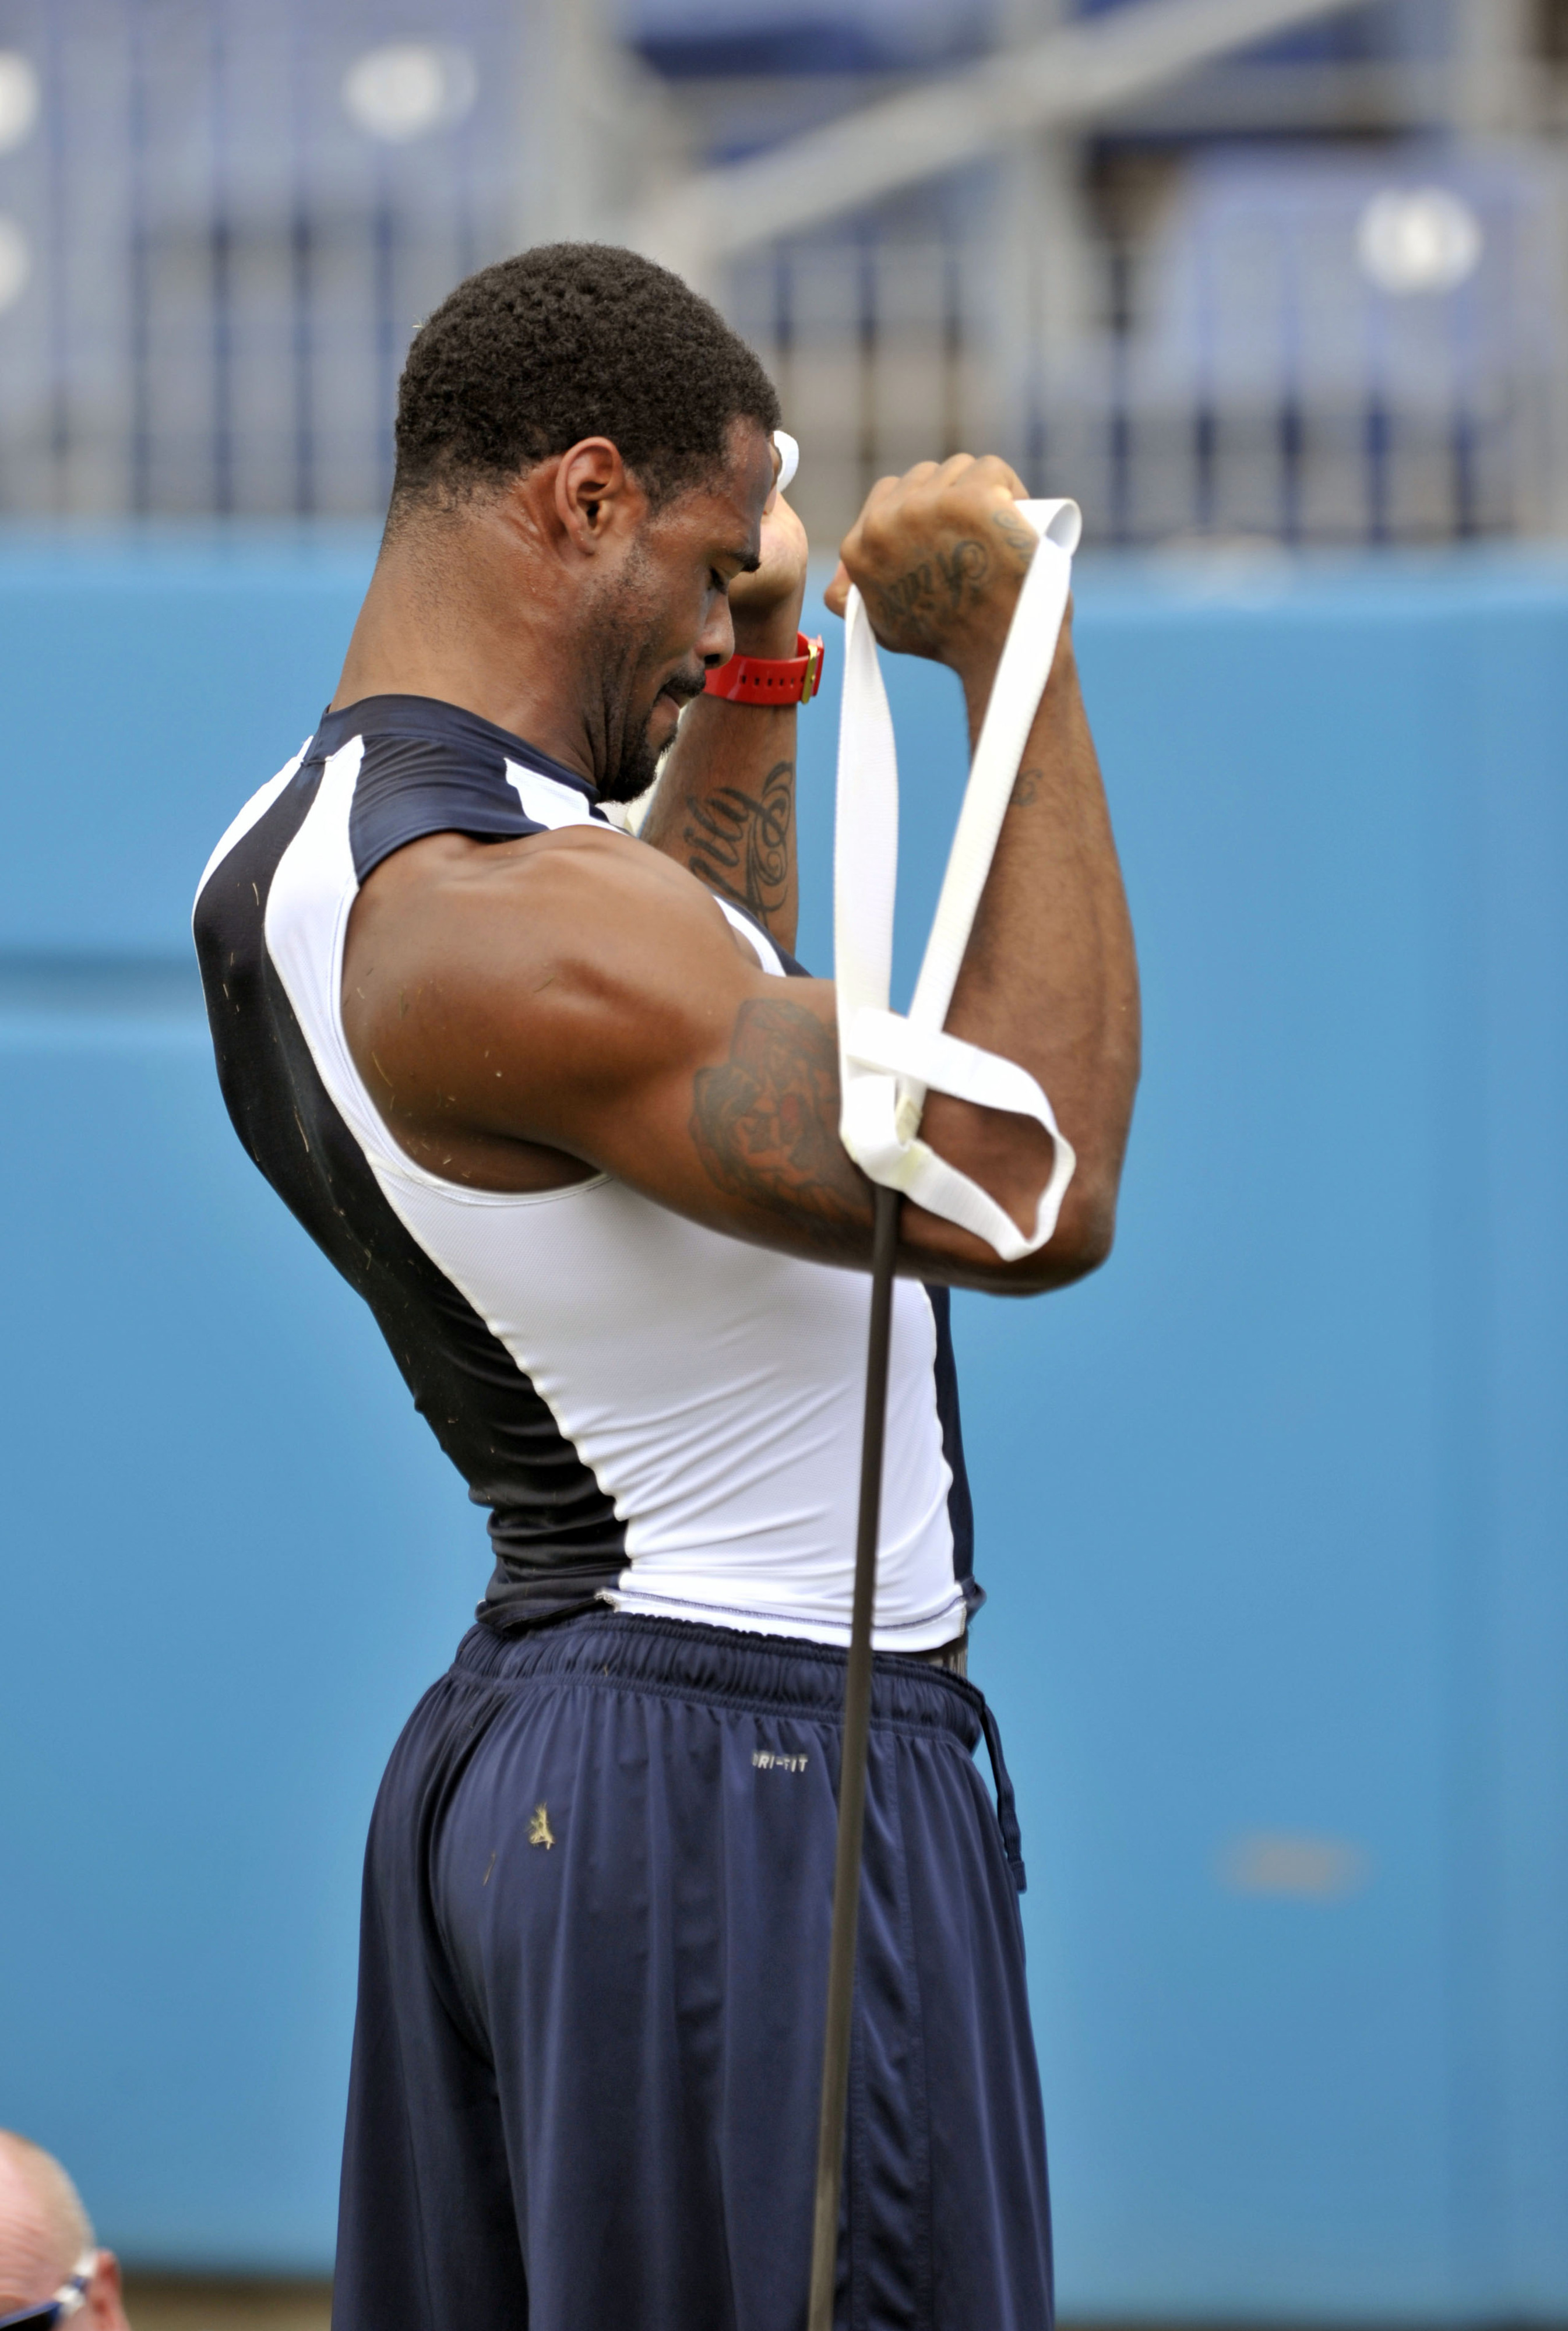 Aug 4, 2012; Nashville, TN, USA; Tennessee Titans player Kenny Britt works out on the sideline during training camp workout at LP Field. Mandatory Credit: Jim Brown-US PRESSWIRE